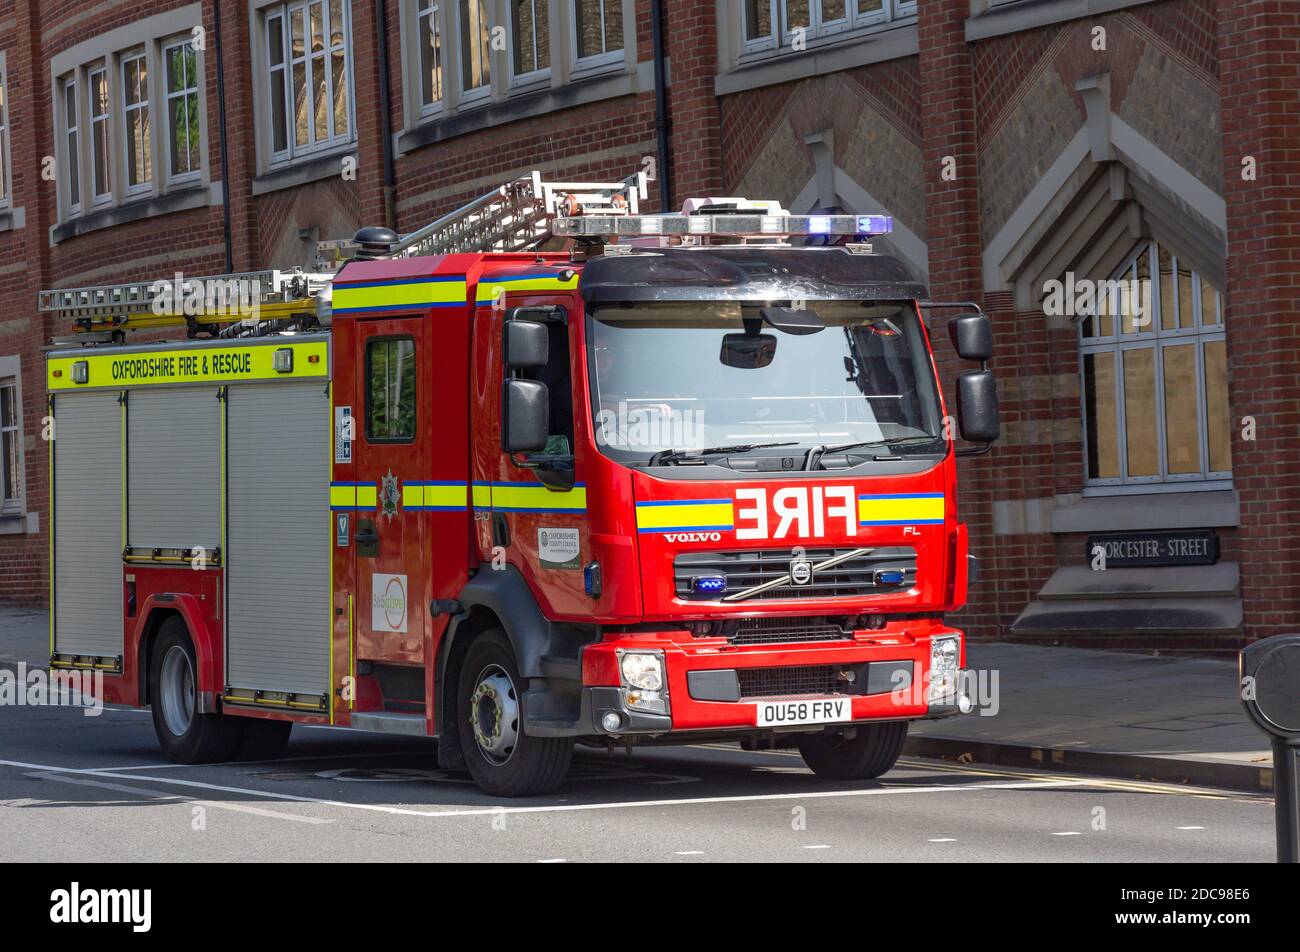 Oxfordshire Fire & Rescue engine on call, Worcester Street, Oxford, Oxfordshire, England, United Kingdom Stock Photo